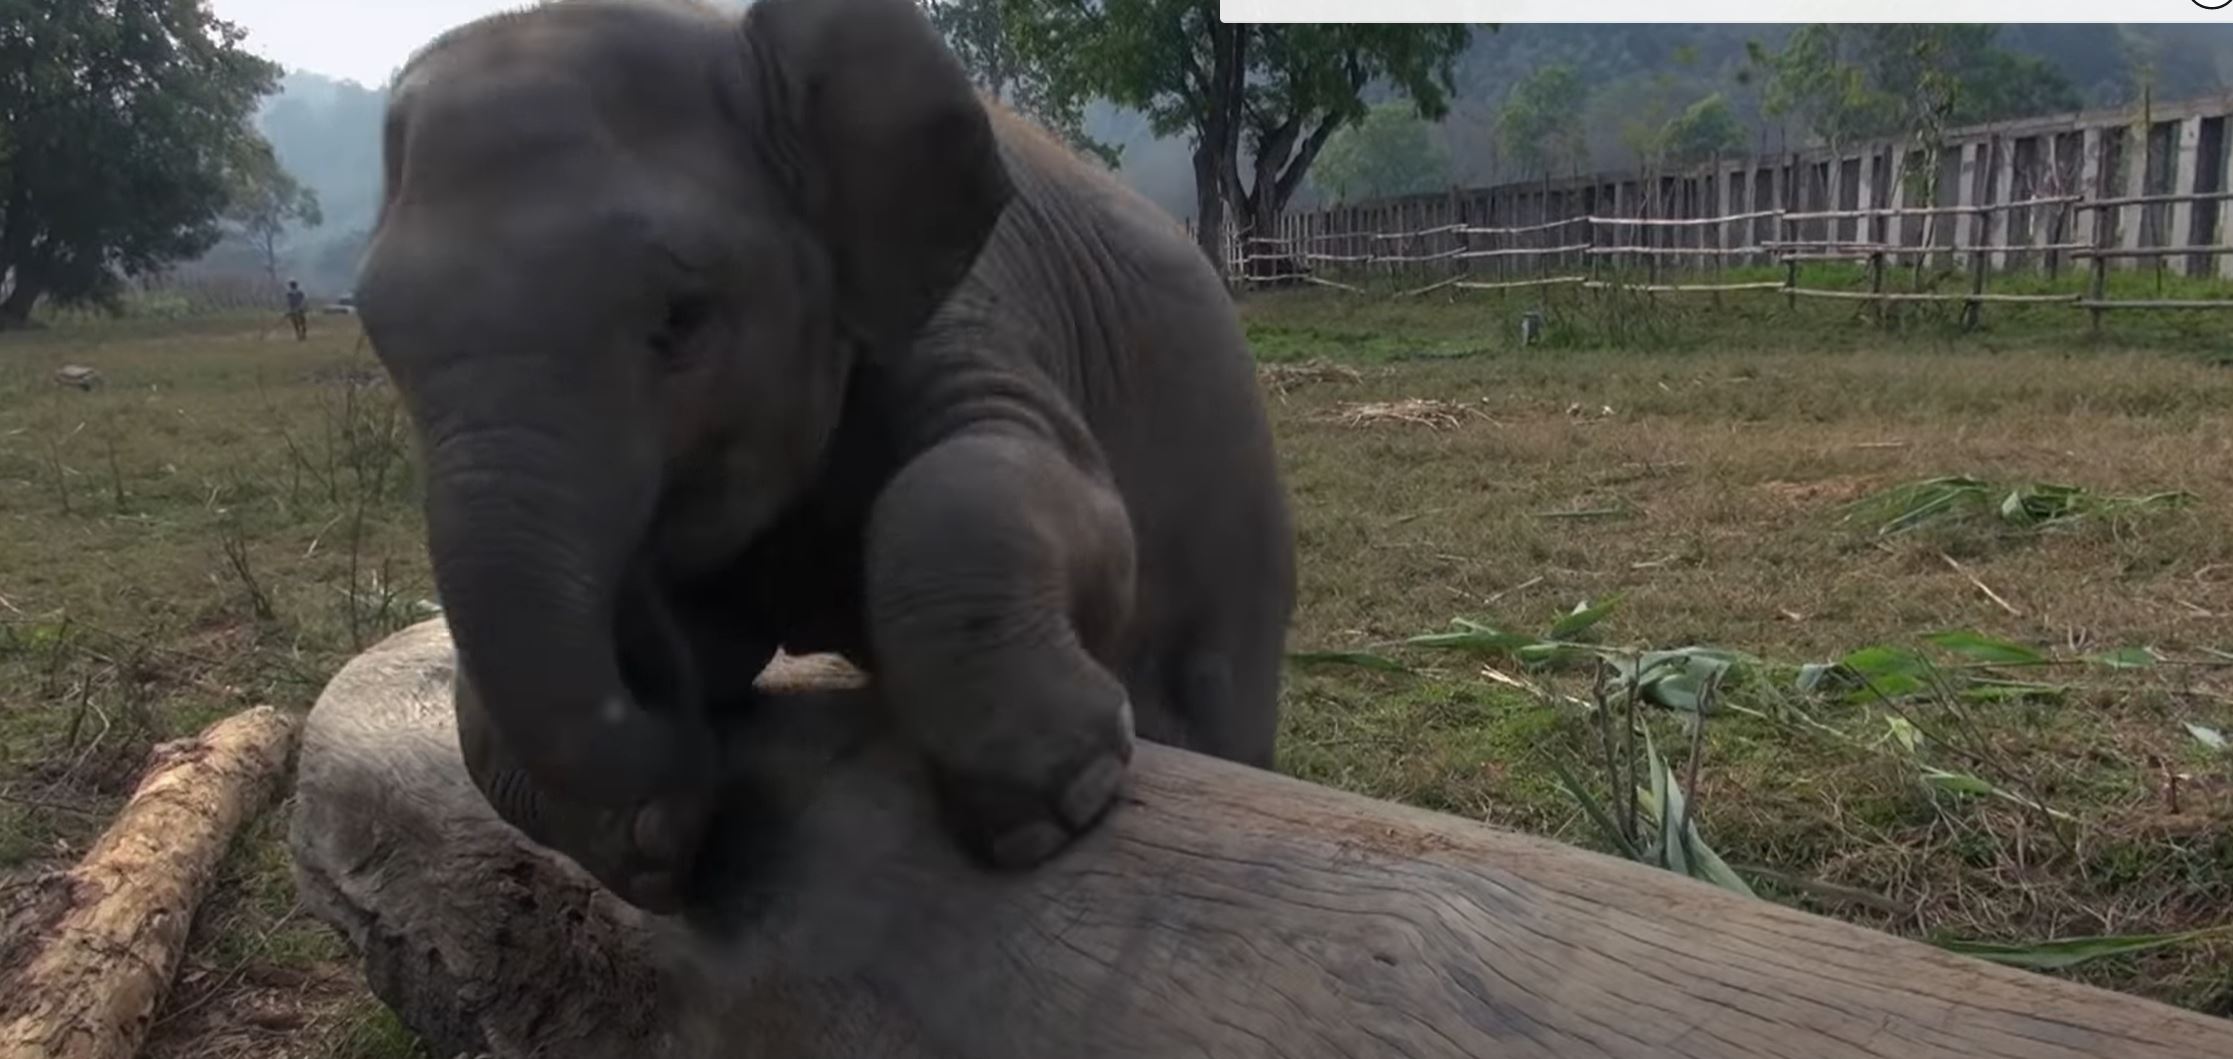 Baby elephant grow up happily and freely at Elephant Nature Park